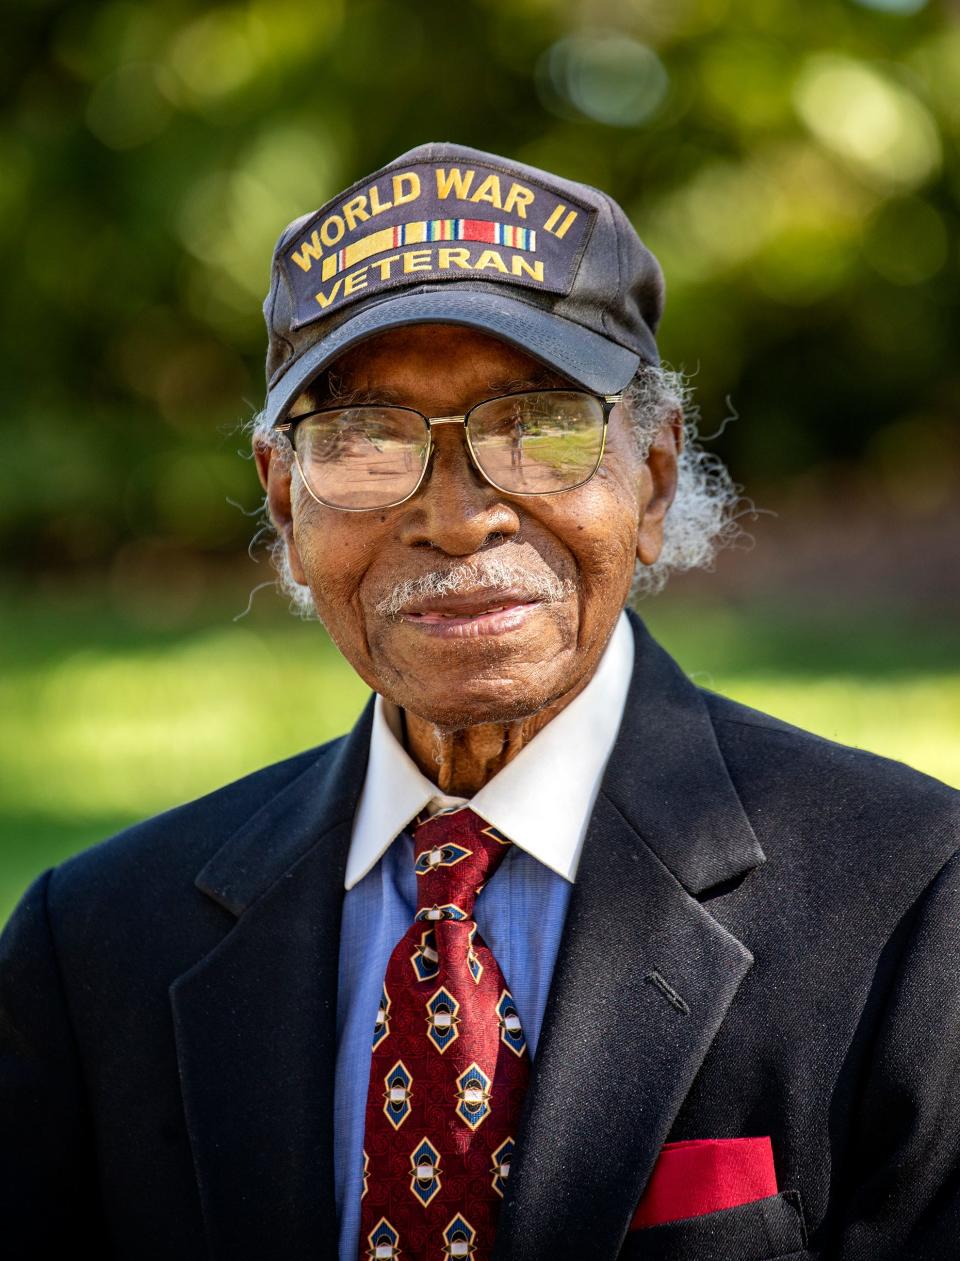 Herman Jenkins, a World War II veteran, died Friday at age 104. He said he often received greetings and thanks from strangers who noticed his World War II Veteran cap. Jenkins served in the Army and took part in the Normandy invasion.